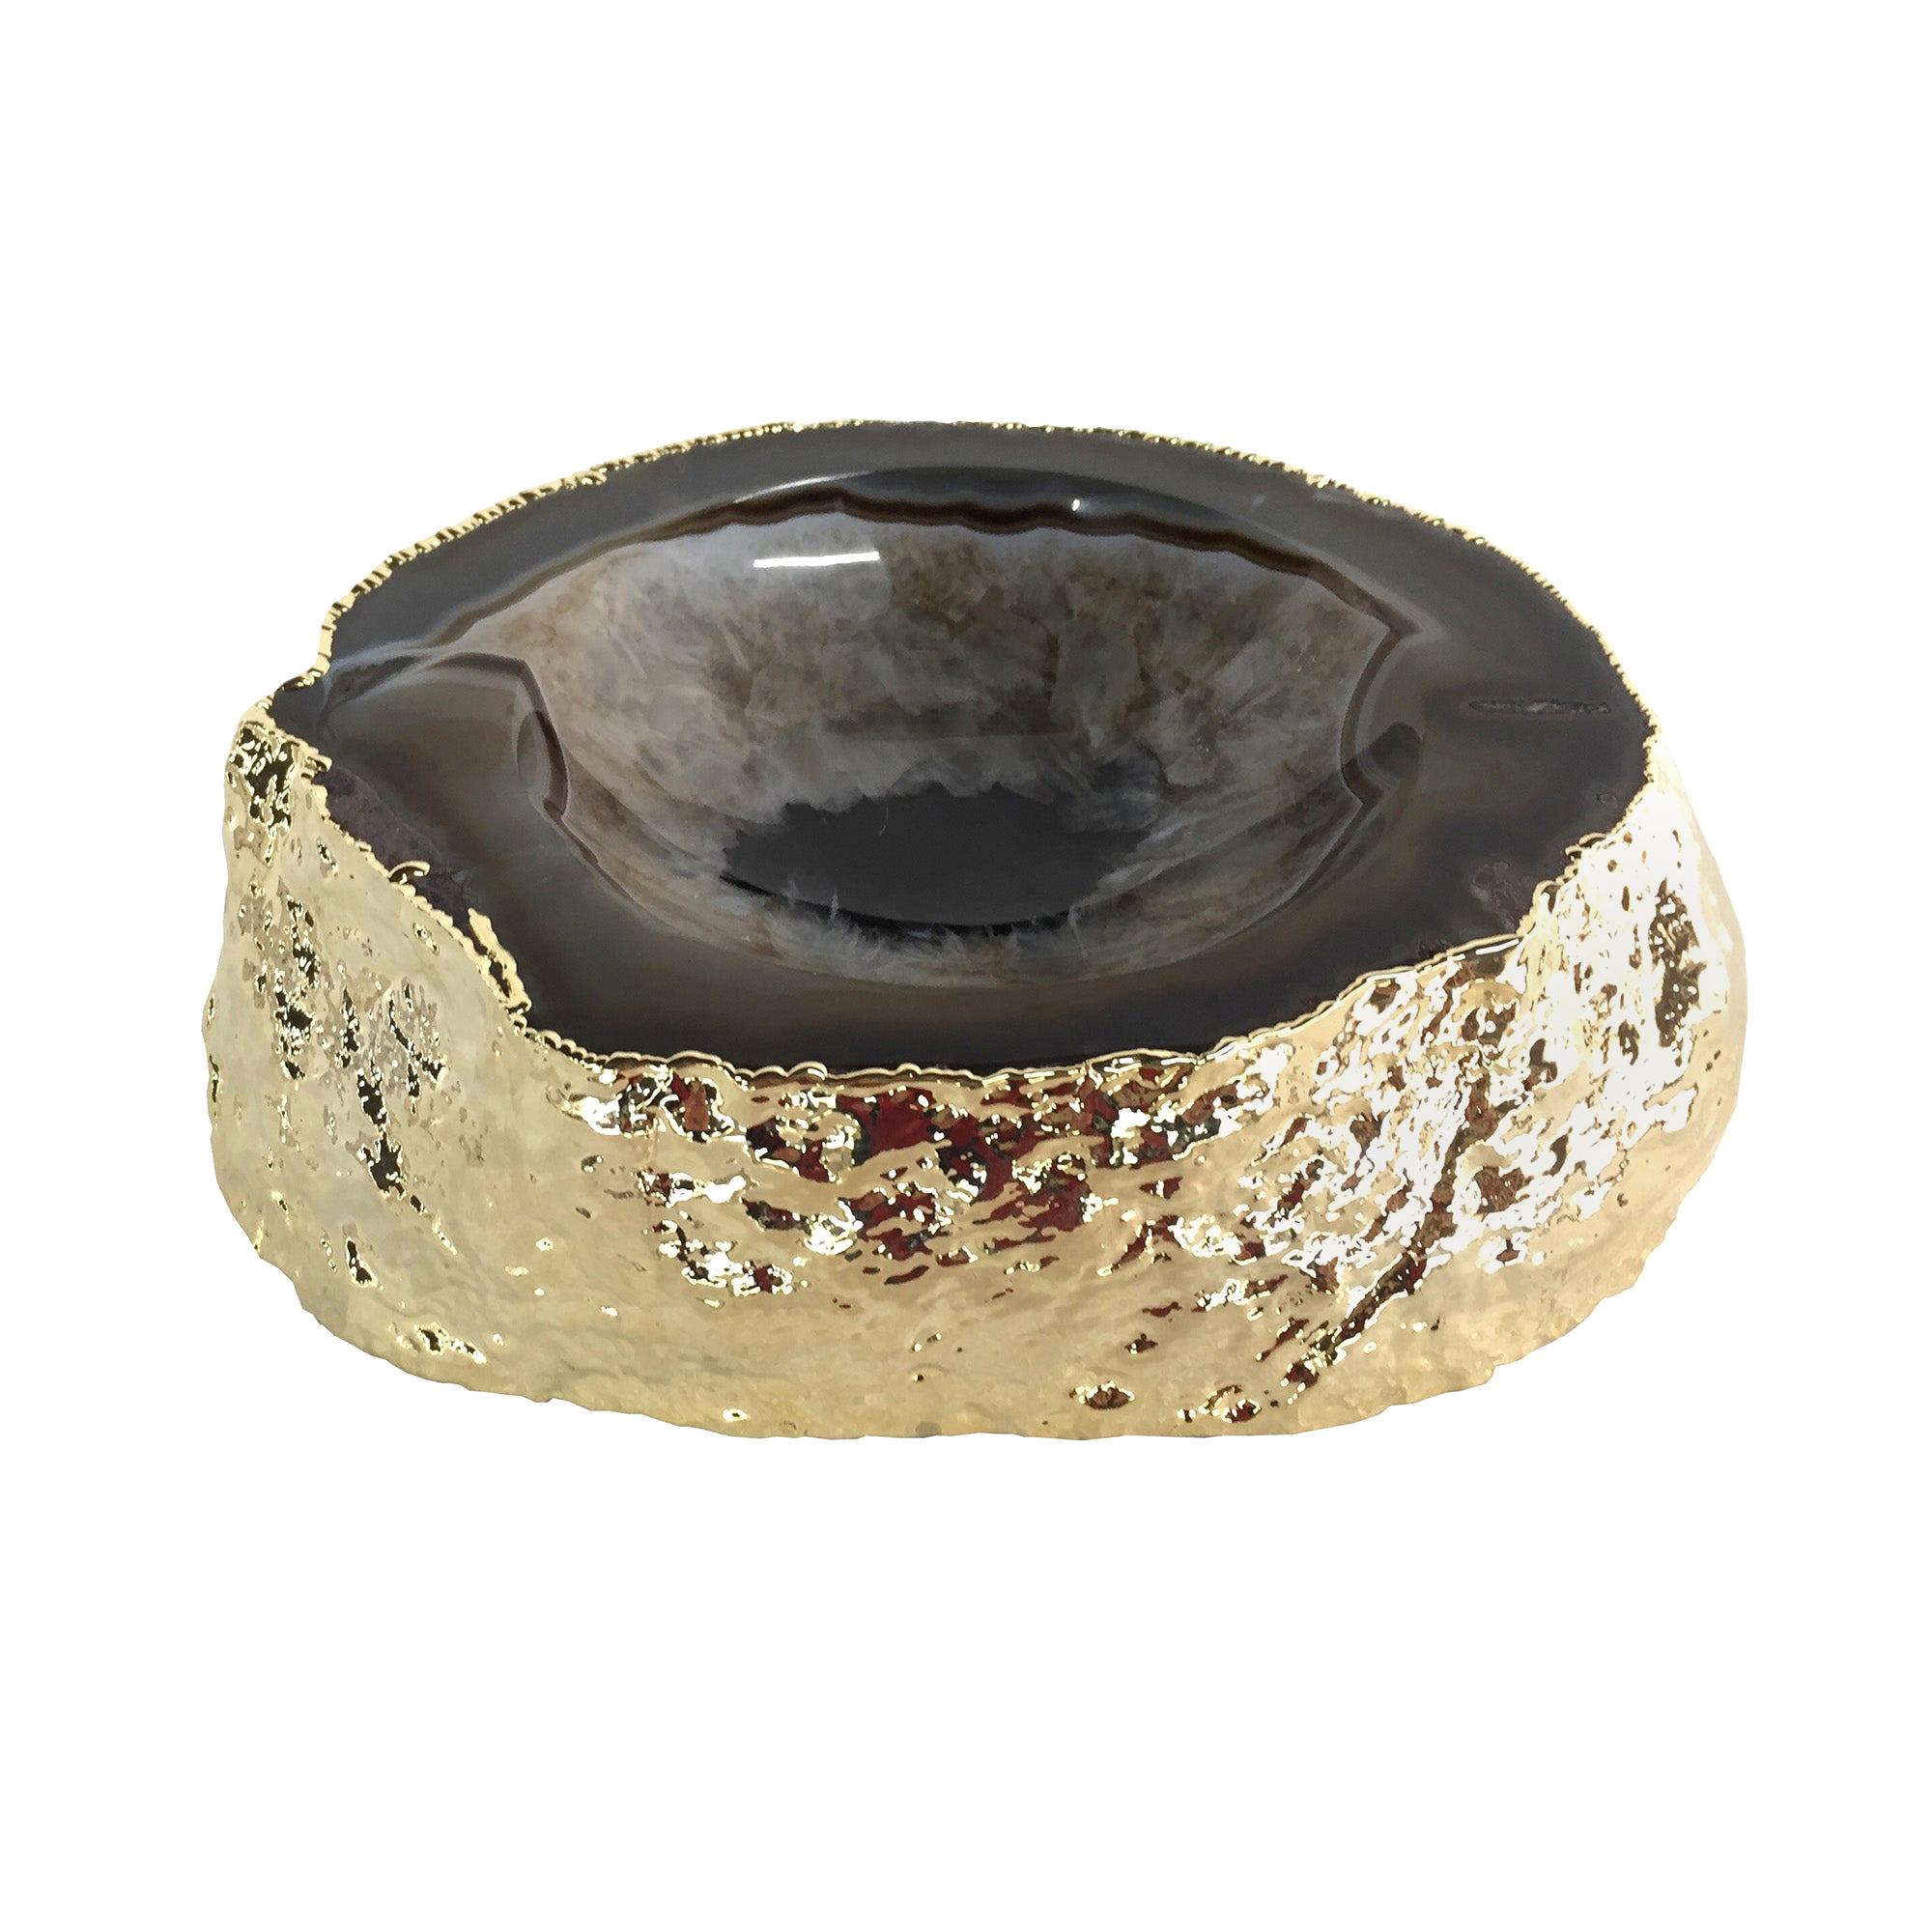 Noemi Polished Agate Bowl in Black and Gold by CuratedKravet